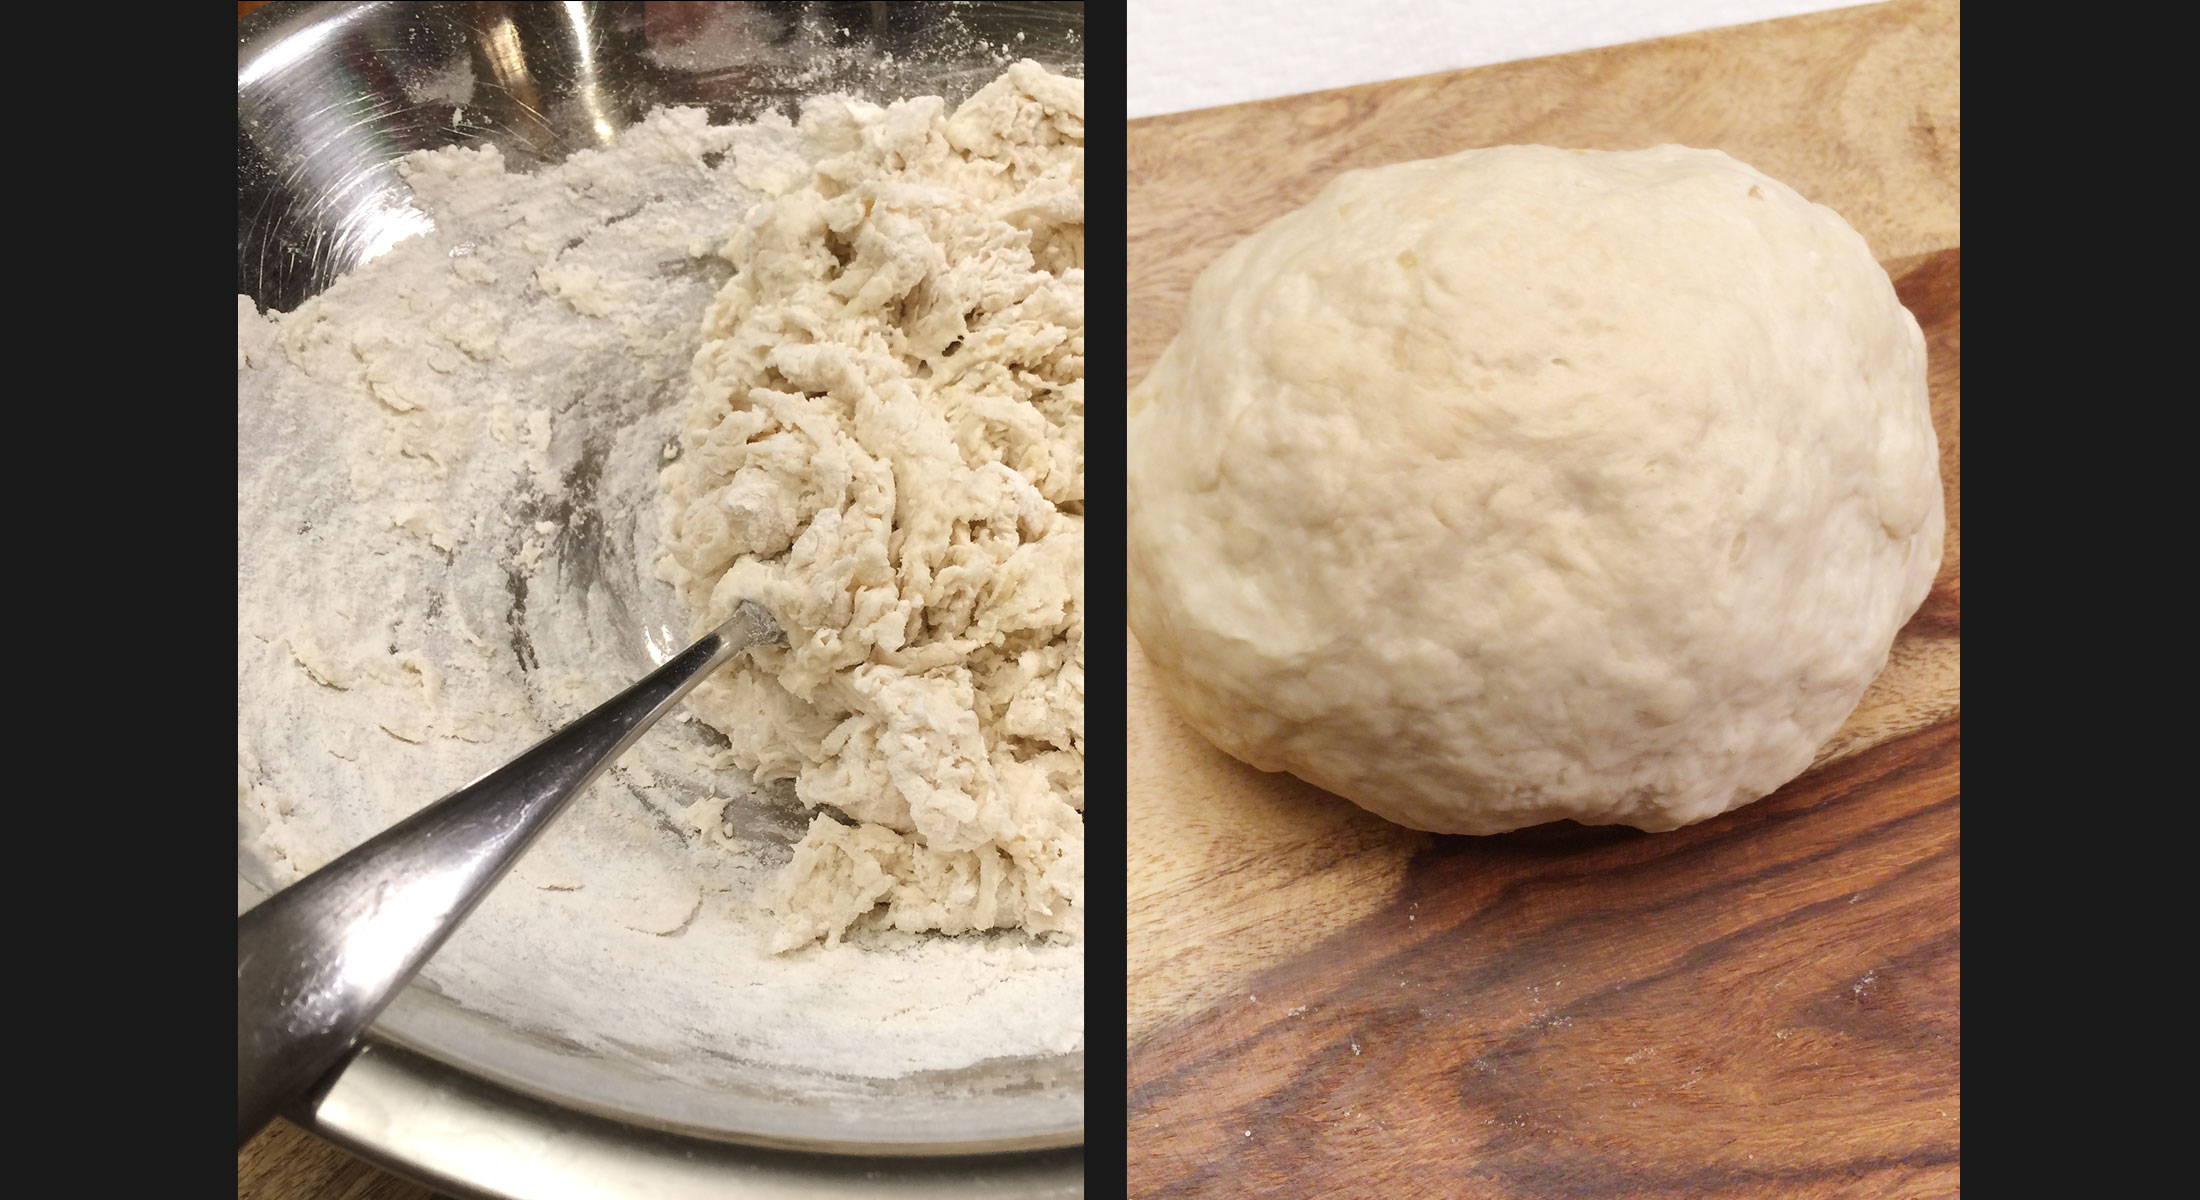 Pizza dough in the mixing bowl vs it fully mixed.